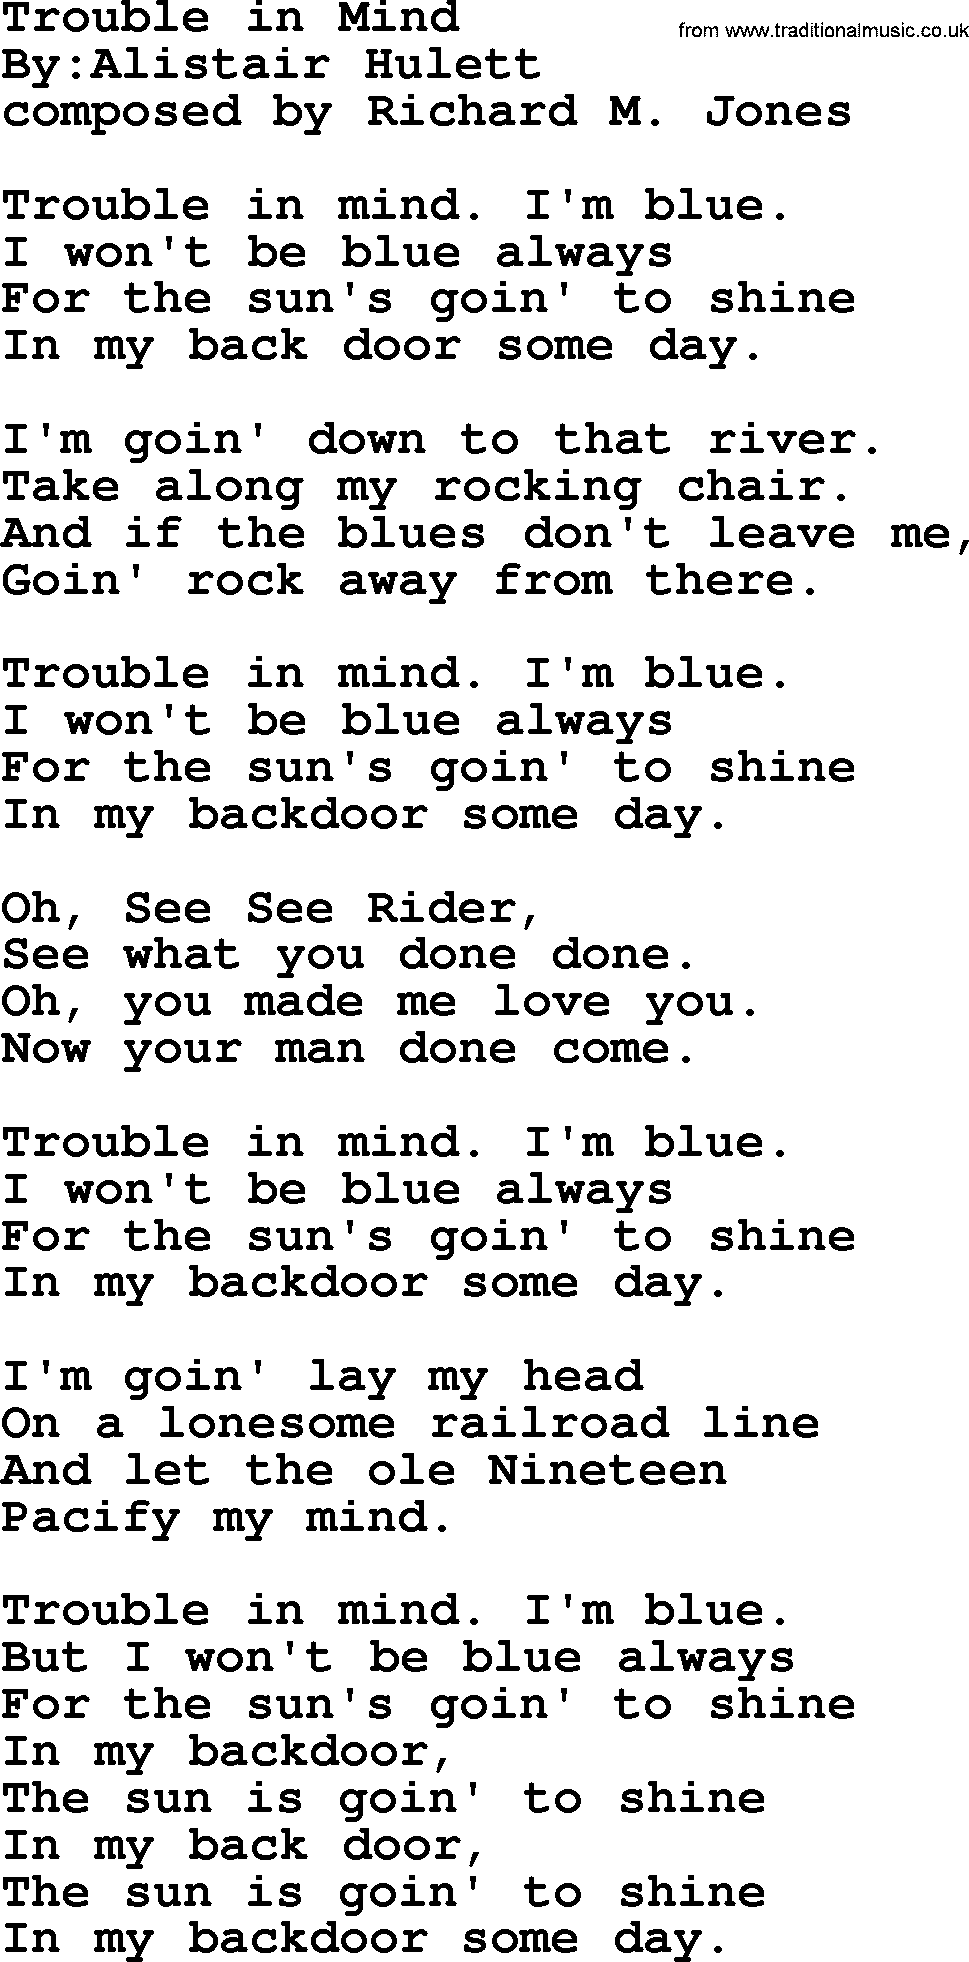 Political, Solidarity, Workers or Union song: Trouble In Mind, lyrics